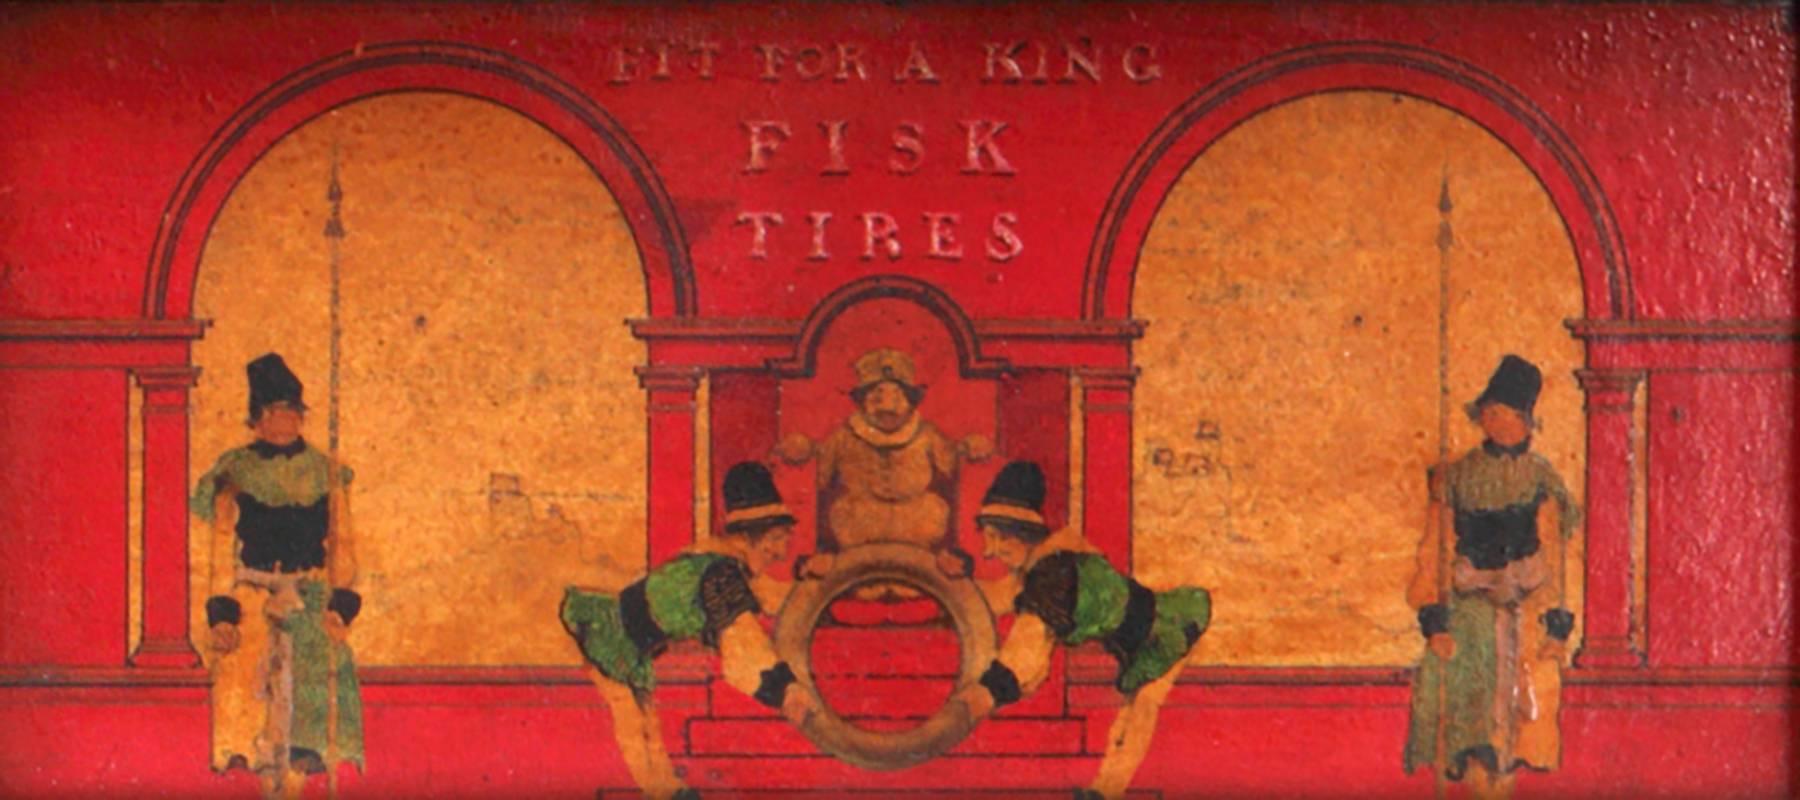 Sketch for Fisk Tires - Fit for a King